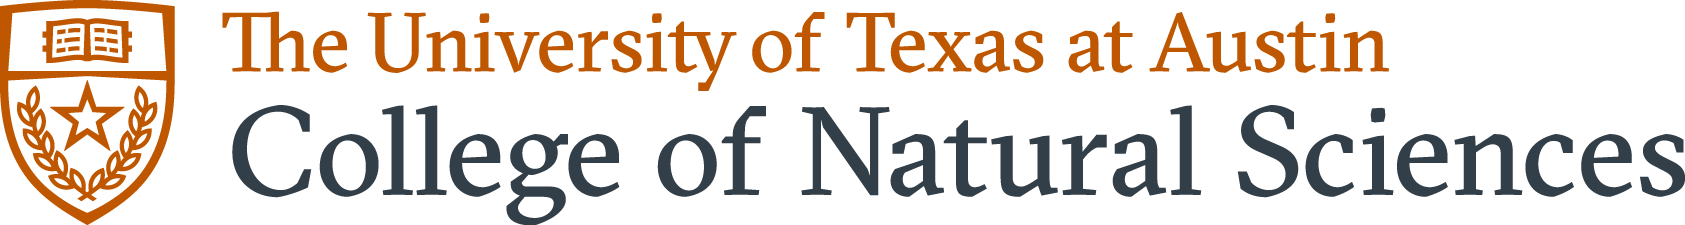 The College of Natural Sciences at The University of Texas at Austin